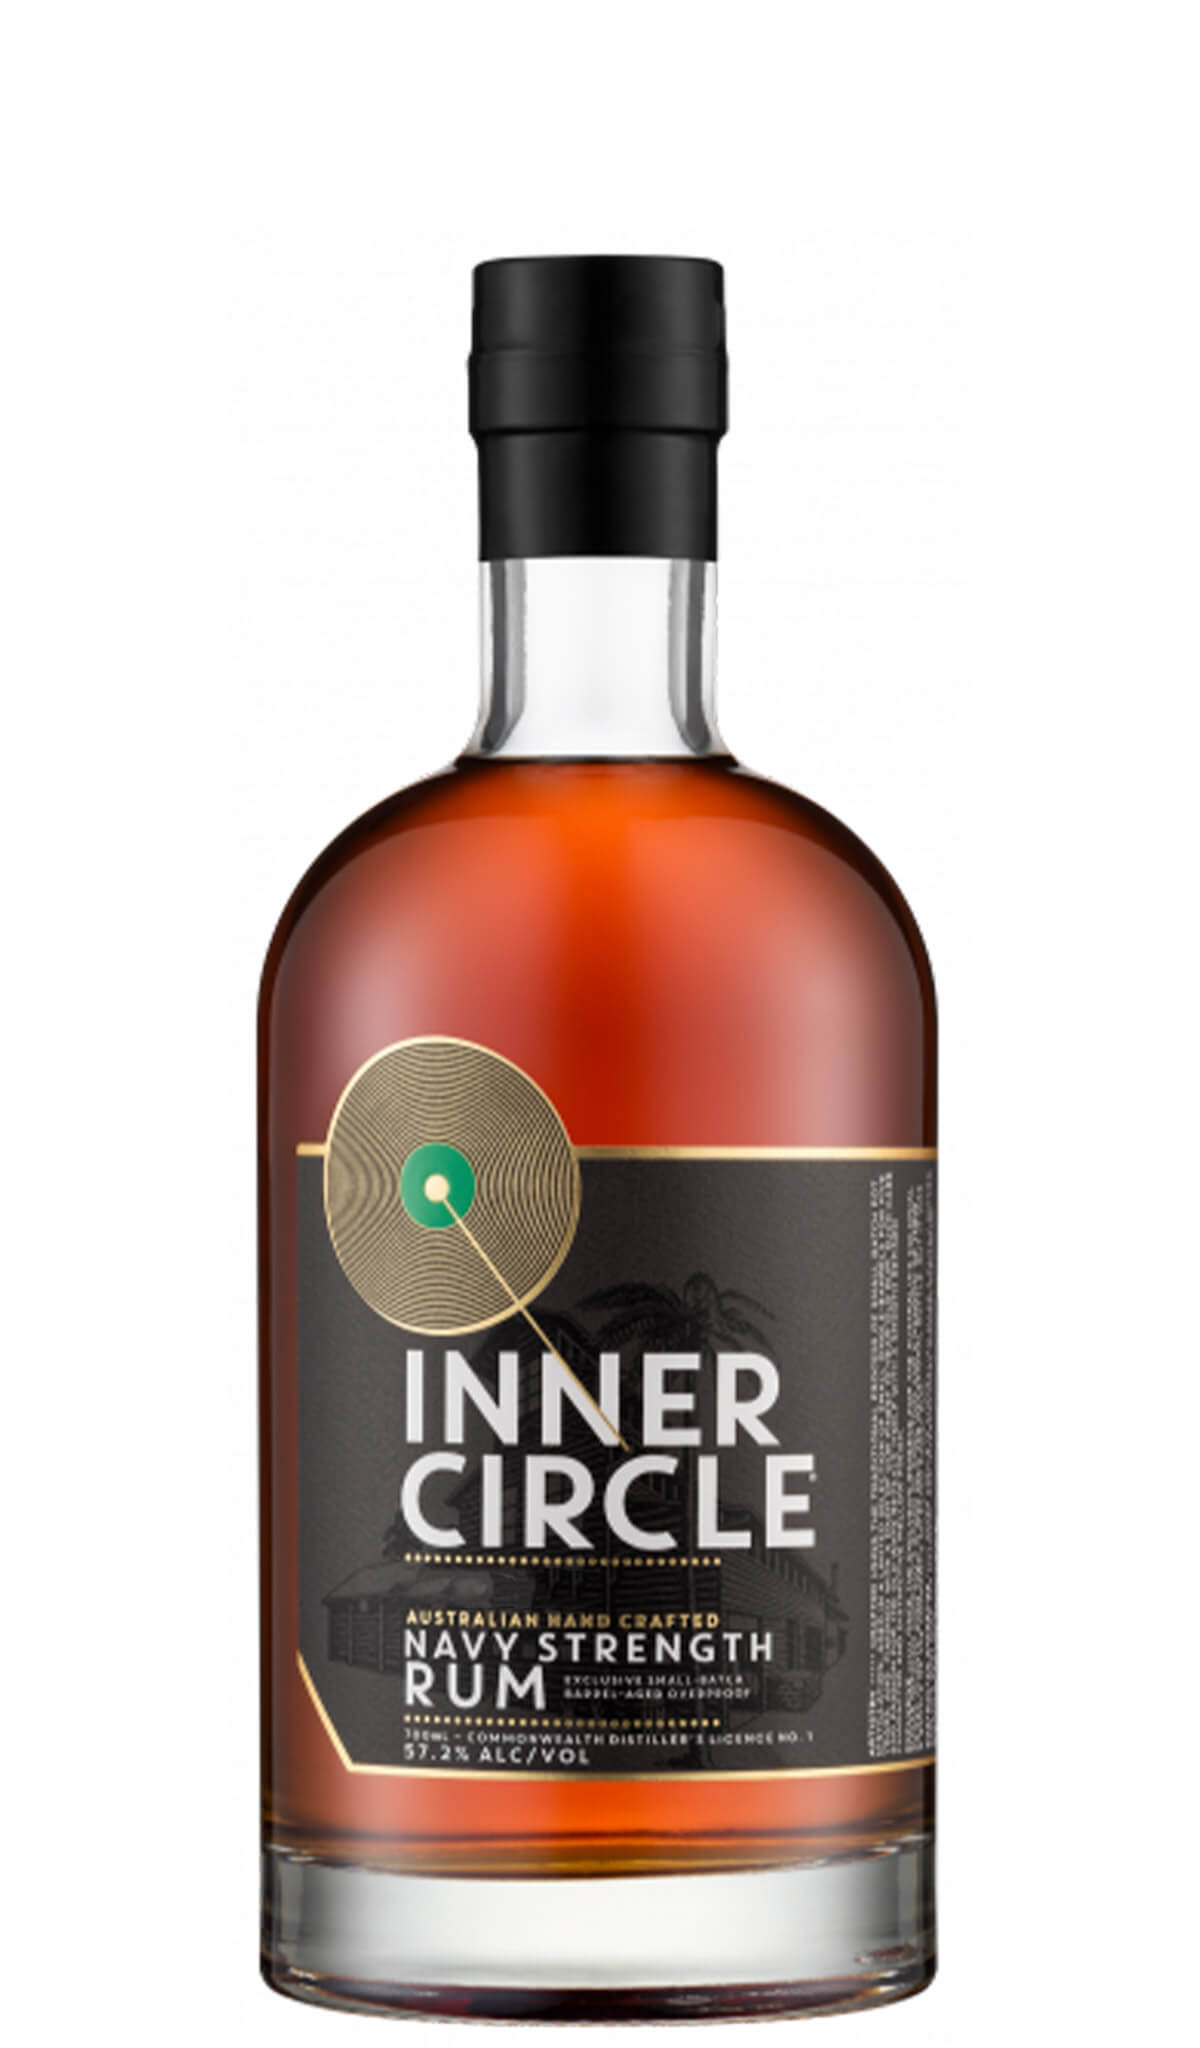 Find out more or buy Inner Circle 5 Year Old Navy Strength Rum Green Dot 57.2% 700ml online at Wine Sellers Direct - Australia’s independent liquor specialists.